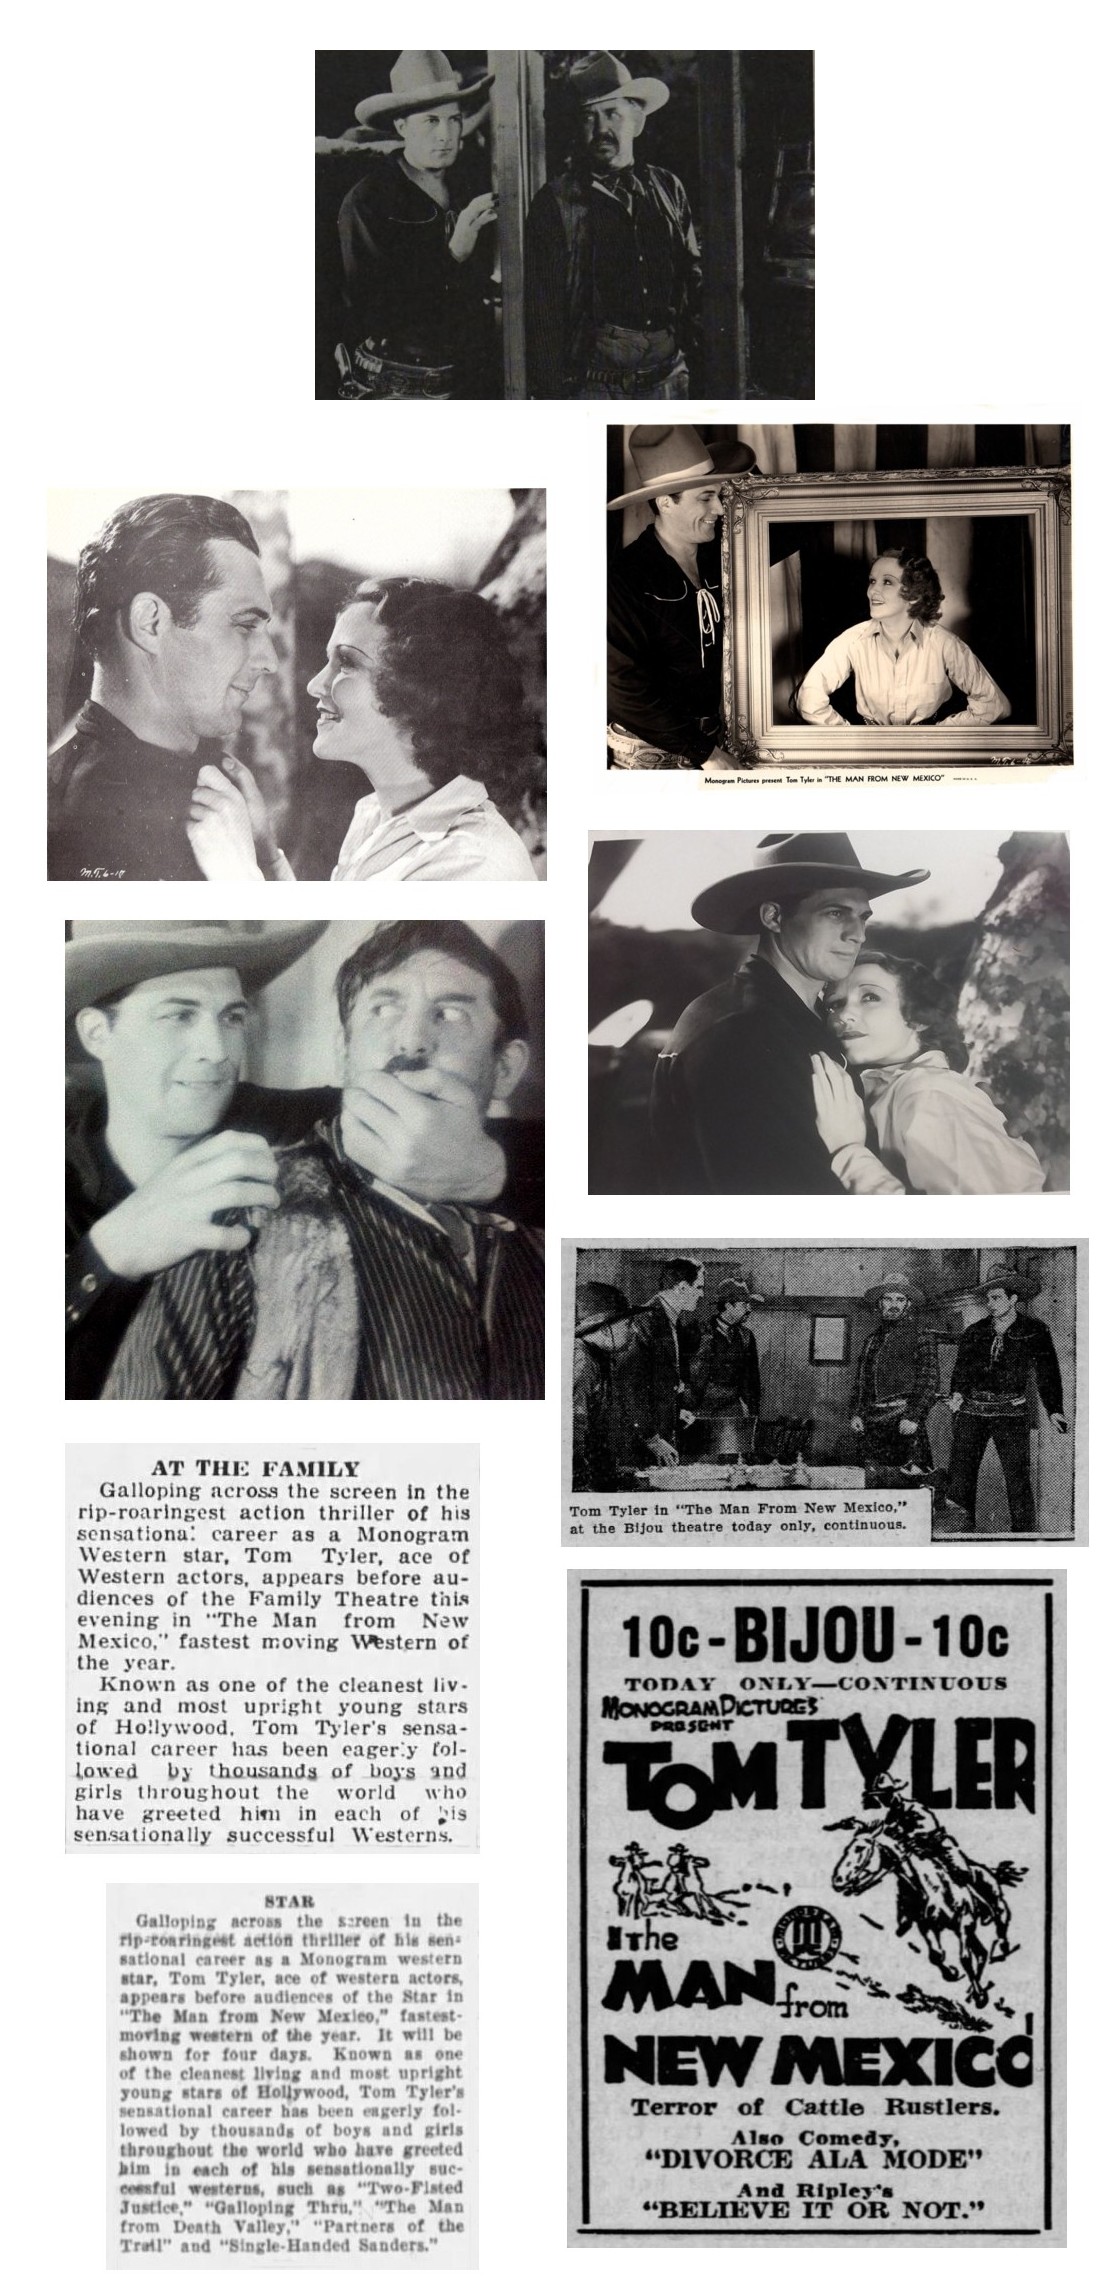 The Man from New Mexico film stills cinema ads film reviews